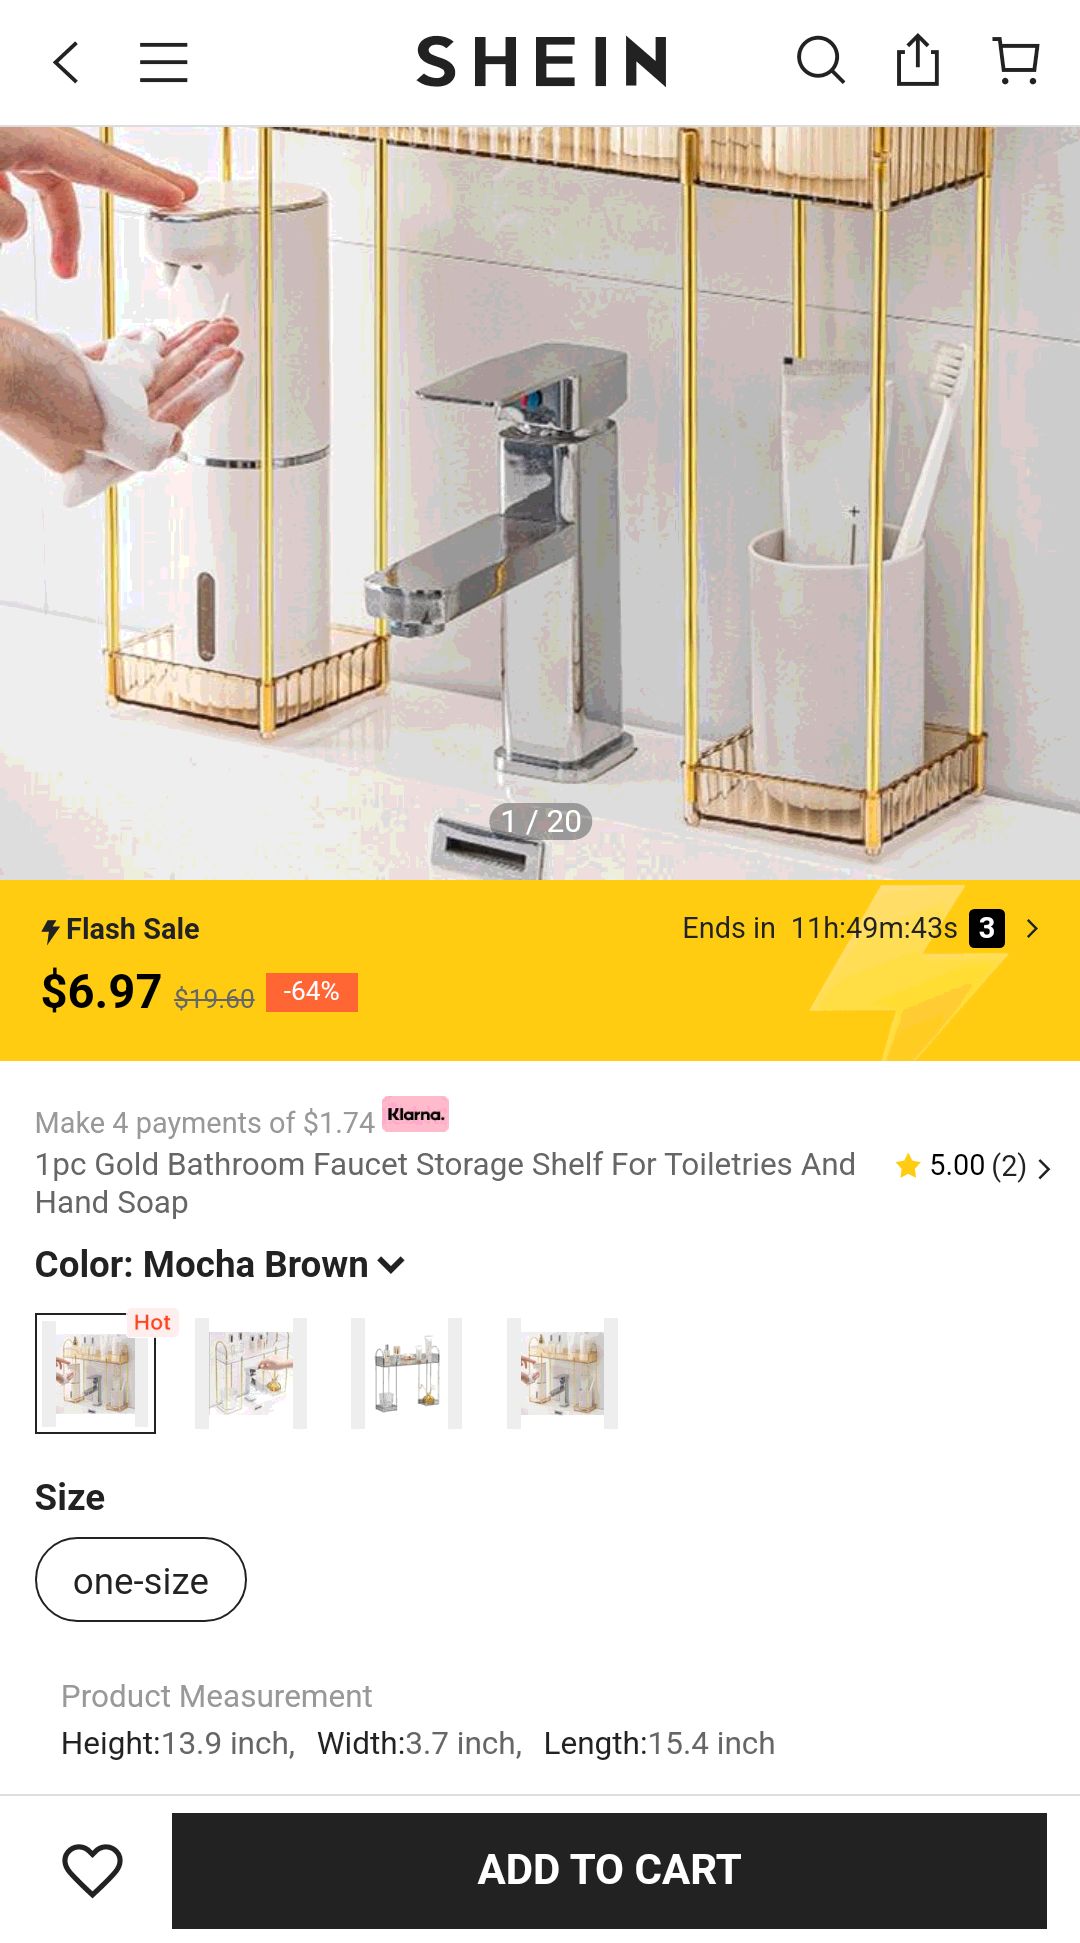 1pc Gold Bathroom Faucet Storage Shelf For Toiletries And Hand Soap | SHEIN USA